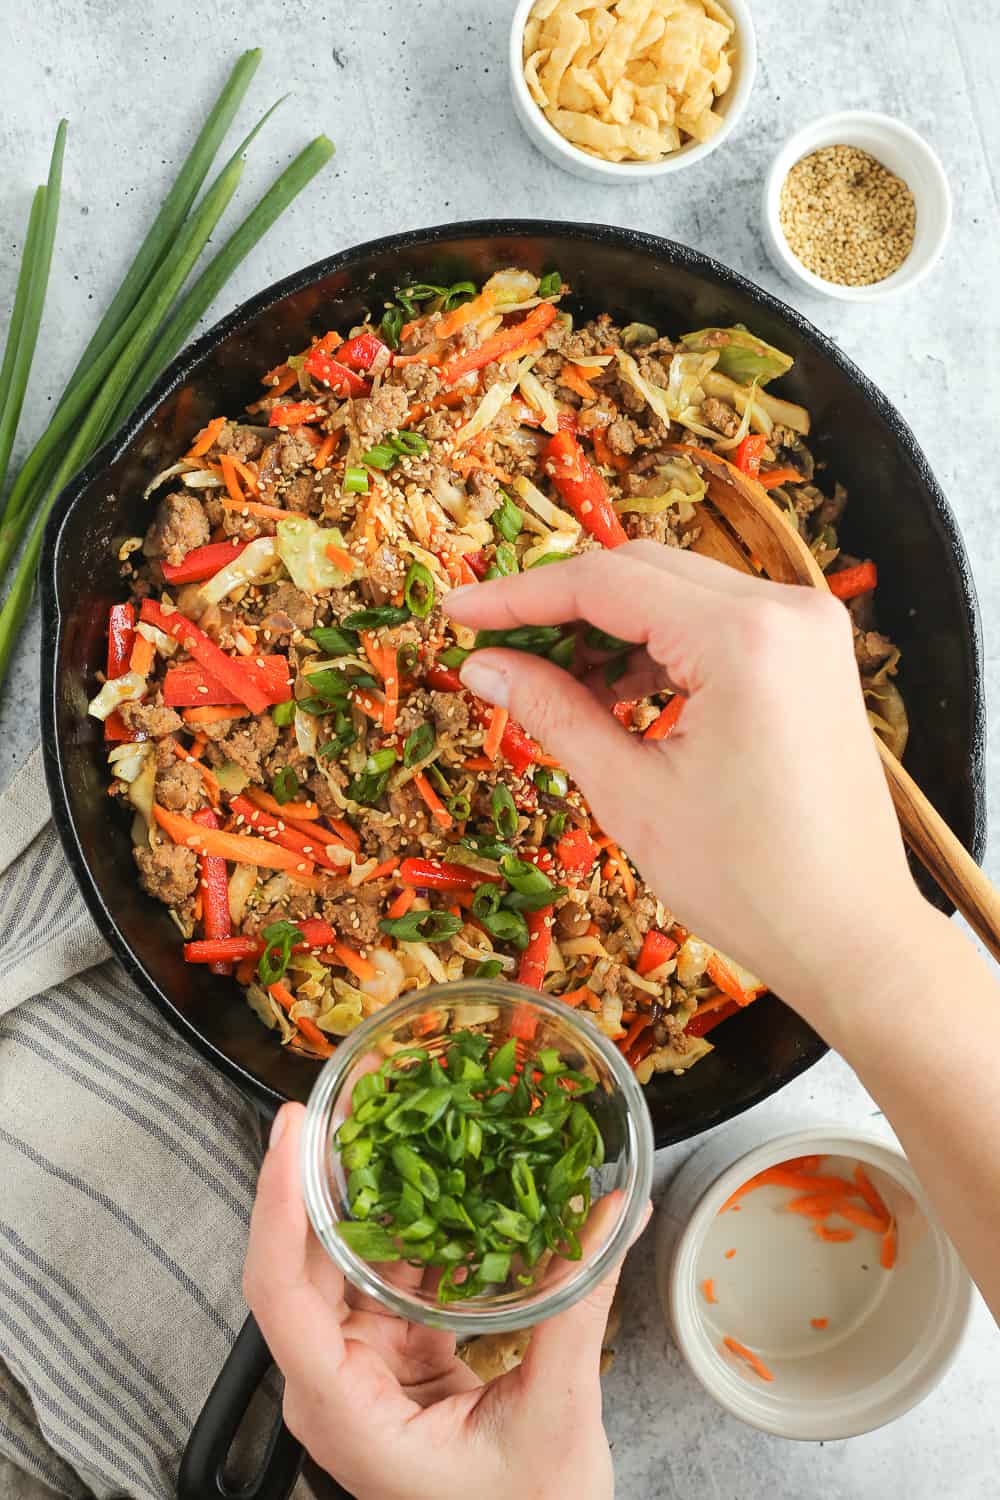 A woman's hand sprinkles sliced green onions over a cast iron skillet filled with cooked ground pork, cabbage, carrots, and red bell peppers